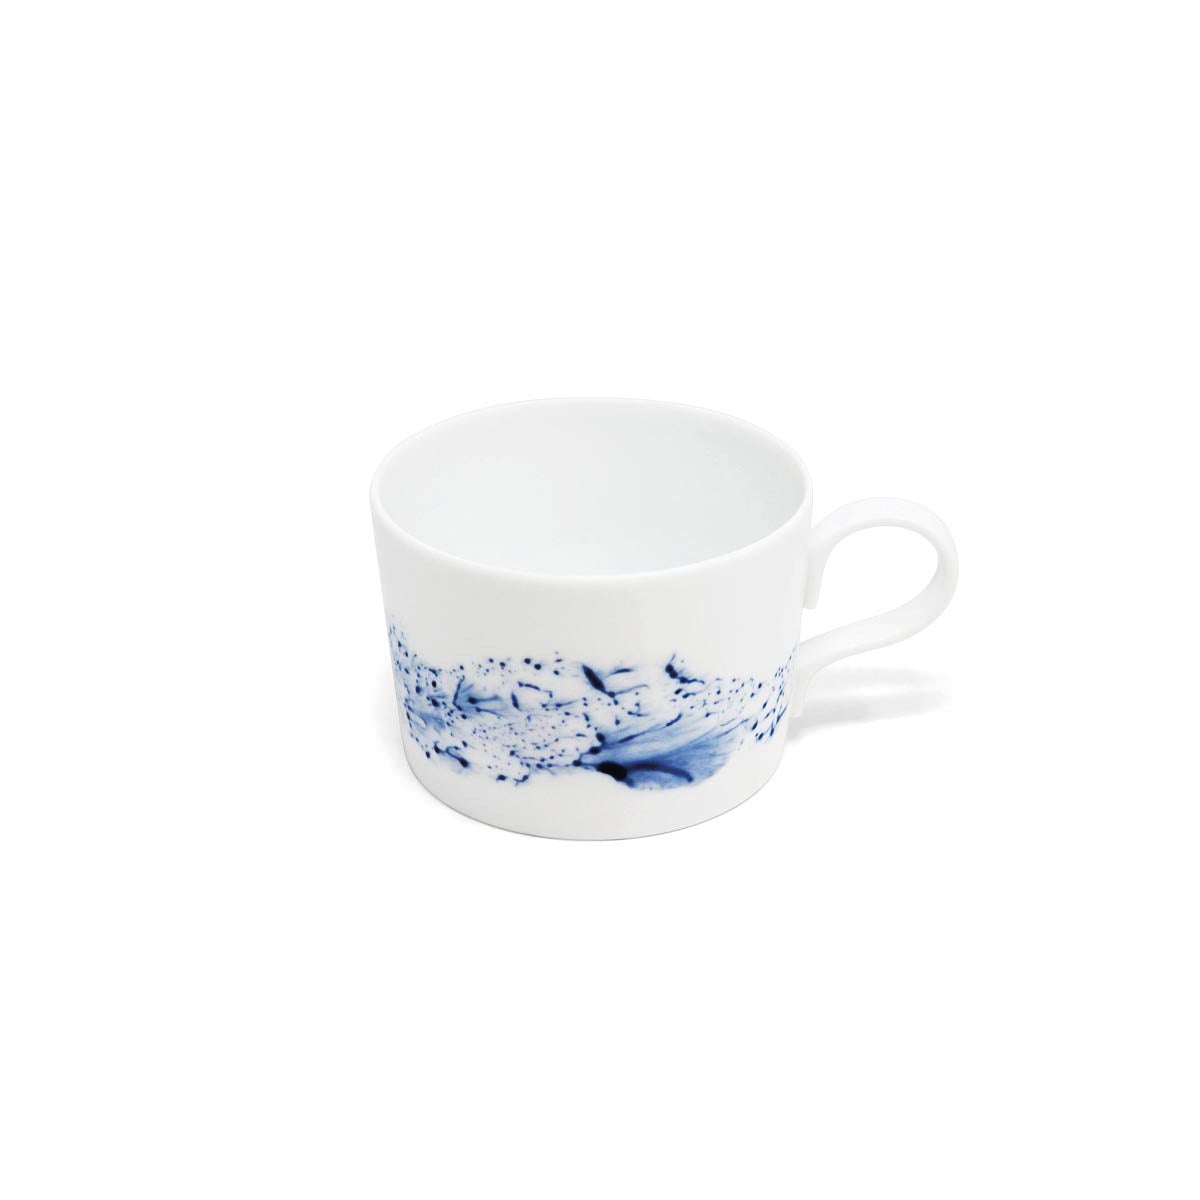 BLUE IMPRESSION - Pair of Breakfast Cups